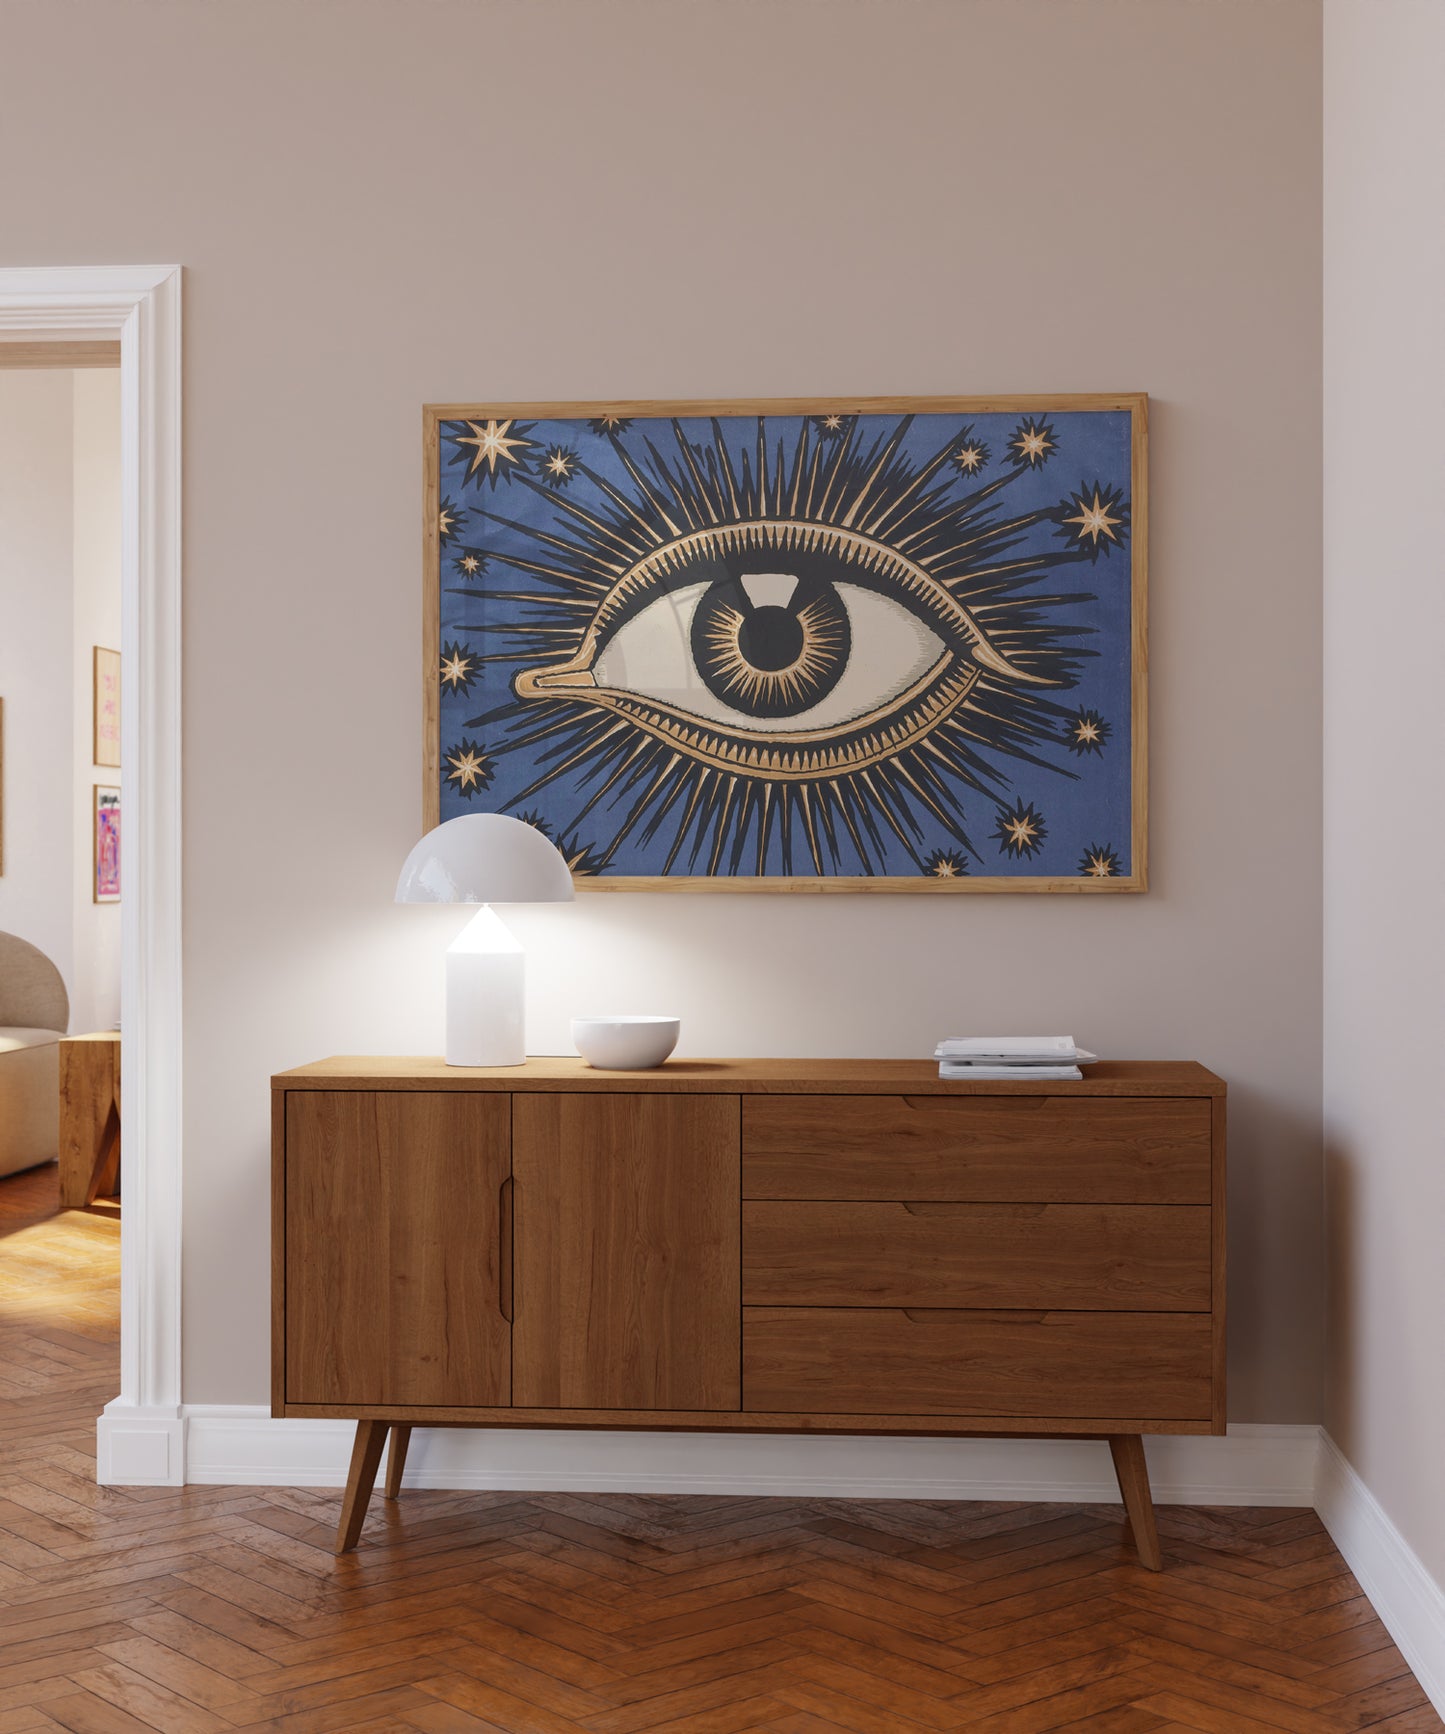 All Seeing Evil Eye Wall Poster